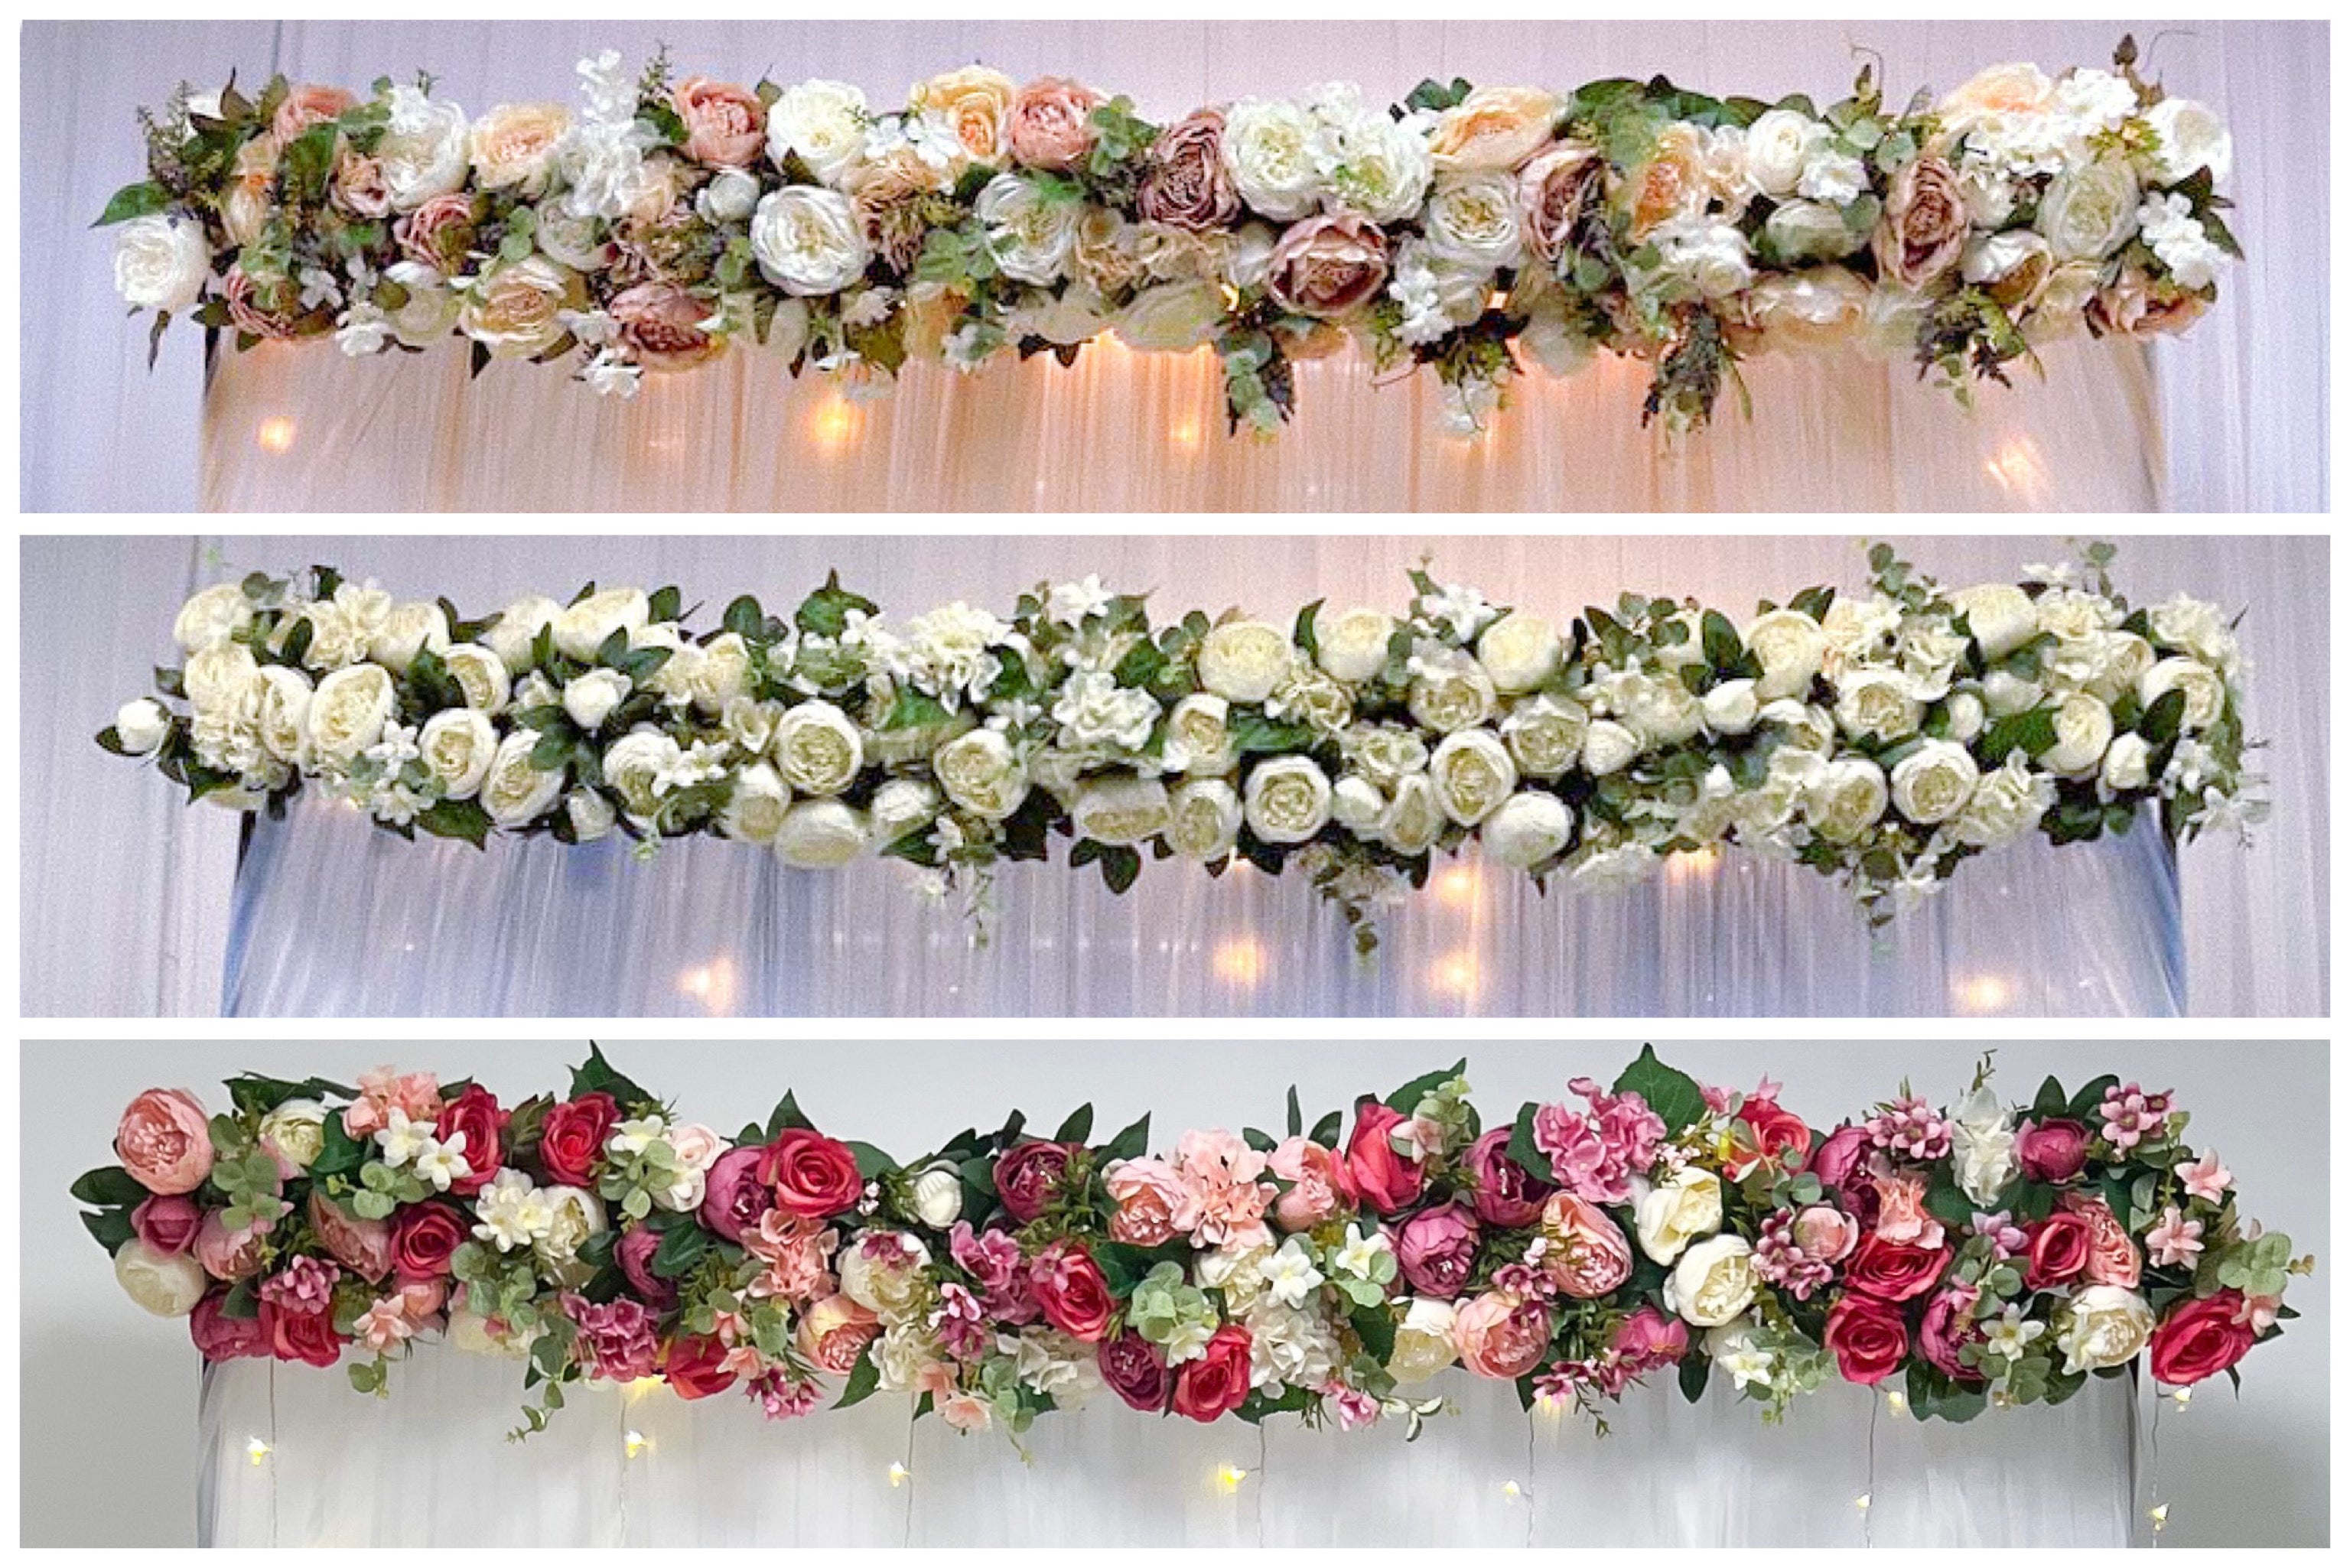 Basic Floral Arch with Fairy-light Backdrop II